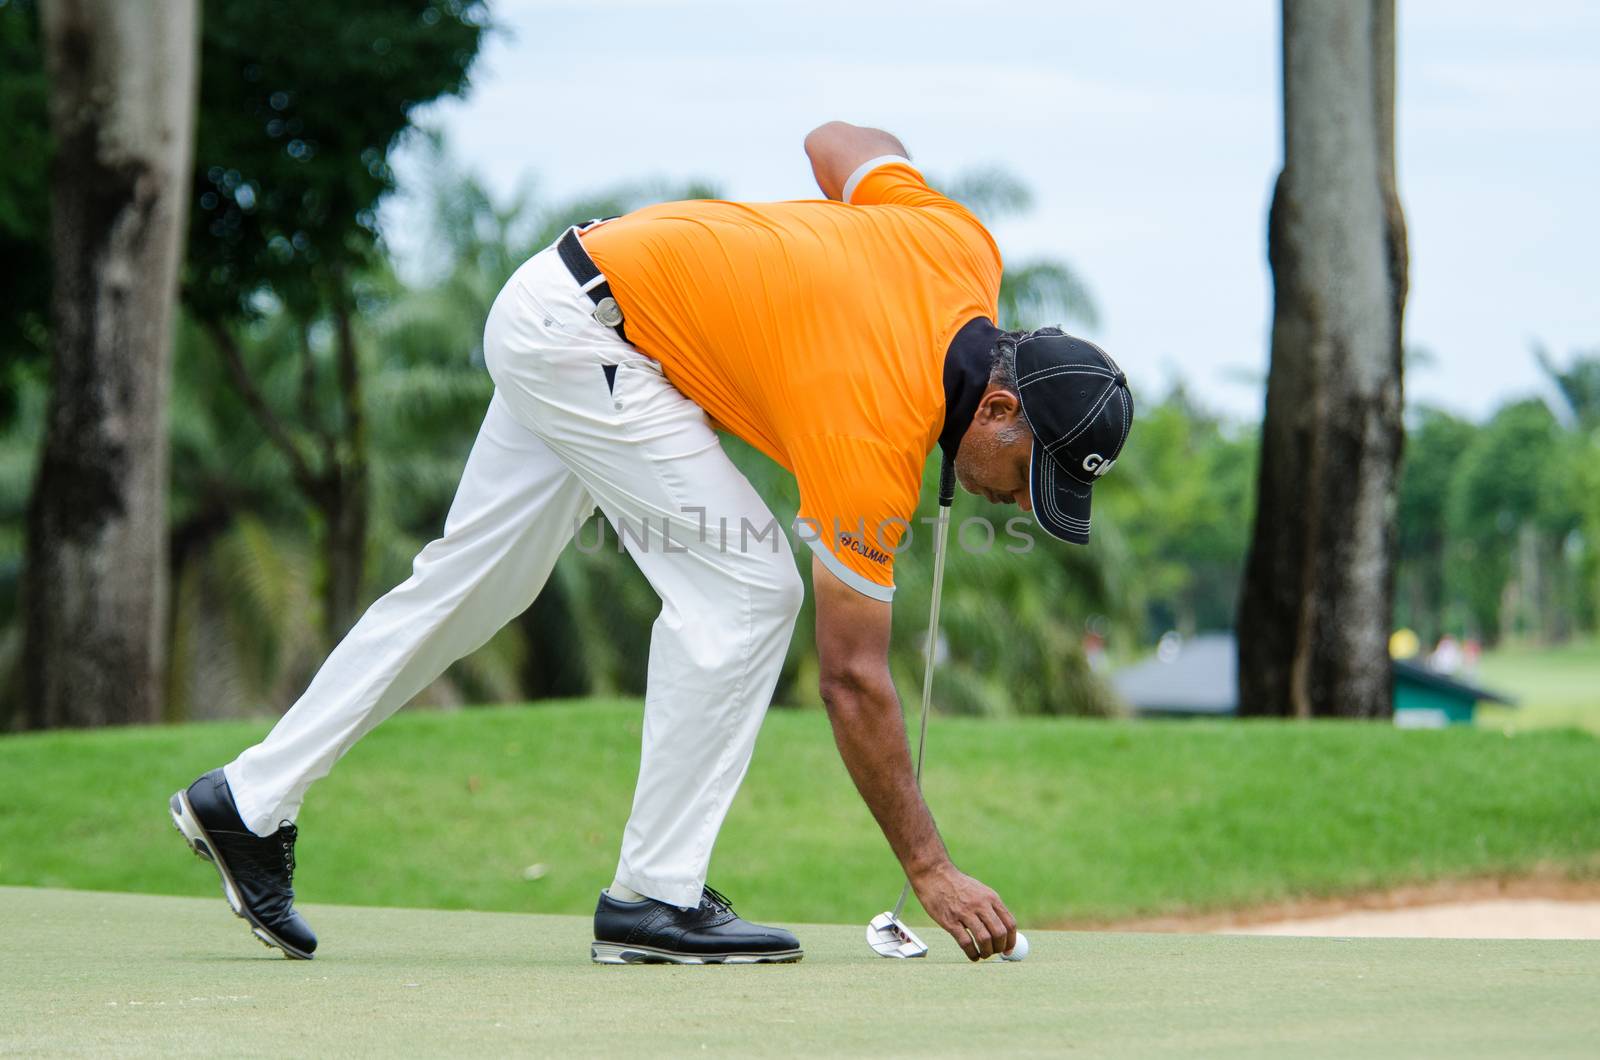 CHONBURI - JULY 31 : Jeev Milkha Singh of India in King's Cup 2016 at Phoenix Gold Golf & Country Club Pattaya on July 31, 2016 in Chonburi, Thailand.